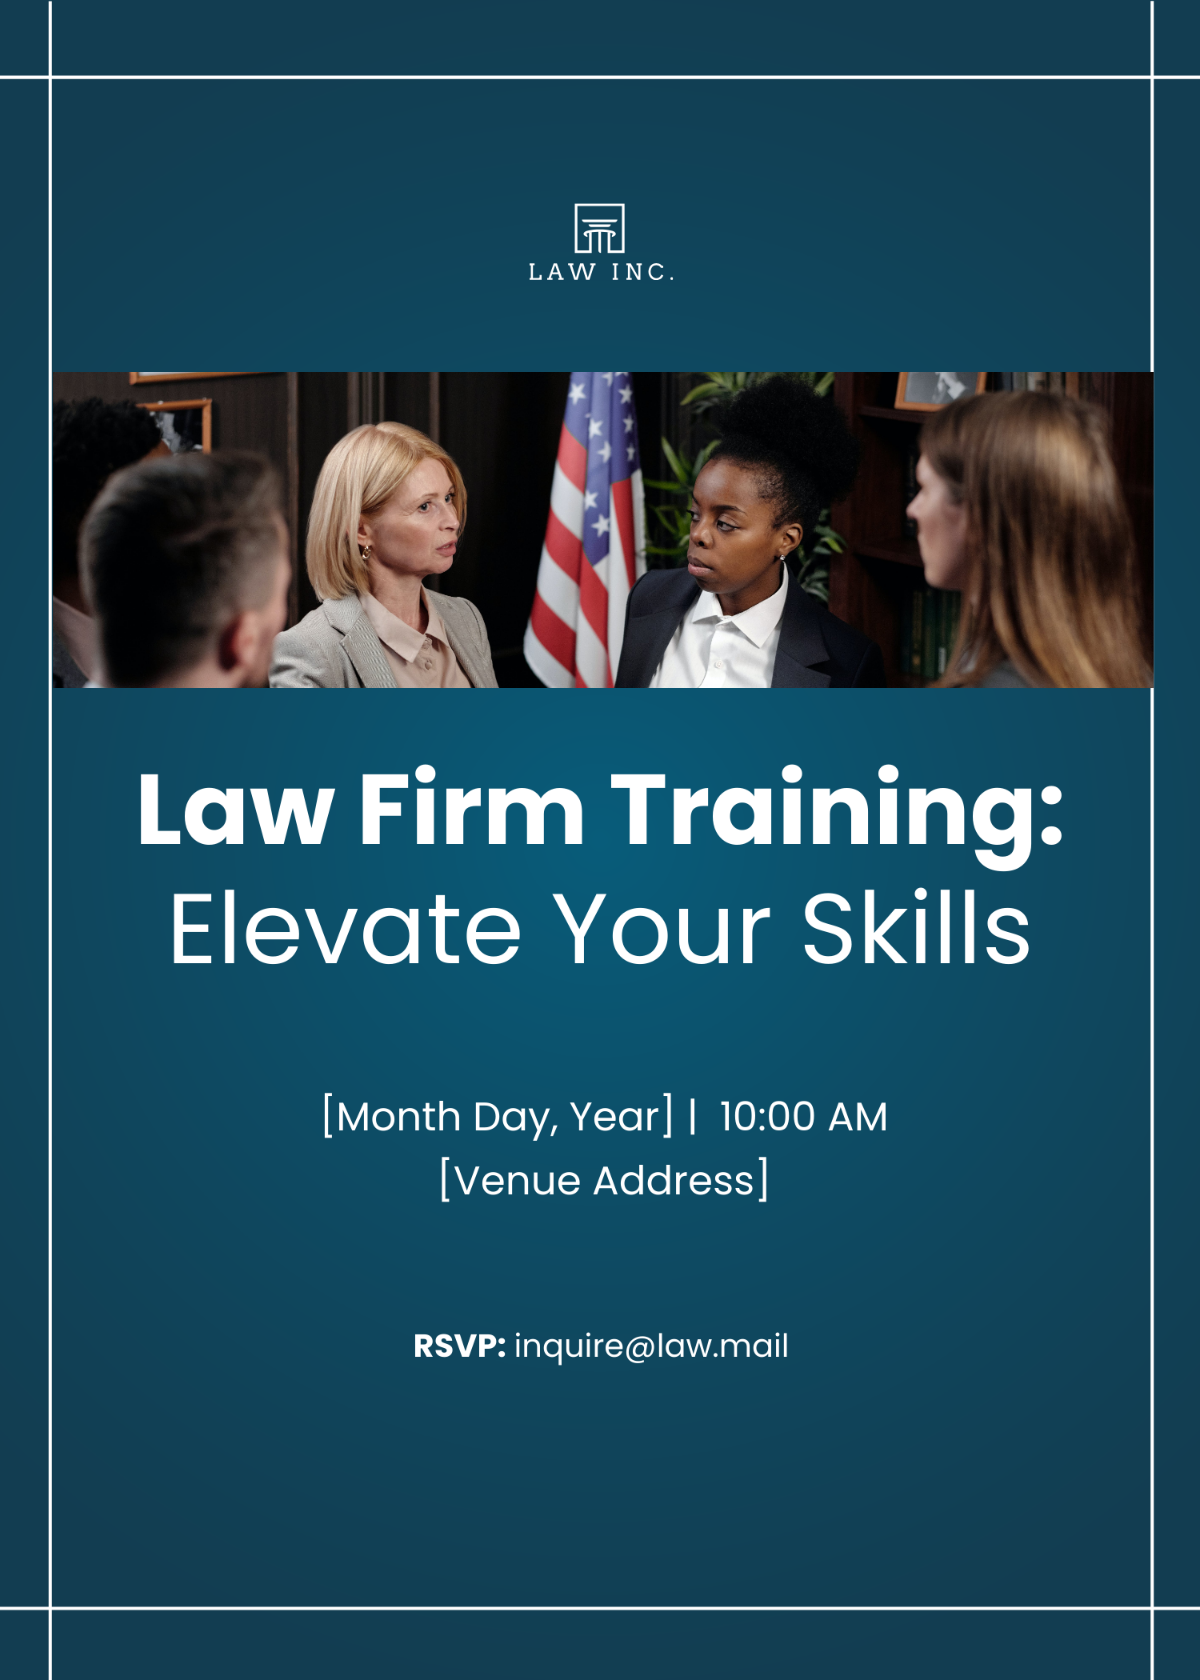 Law Firm Training Invitation Template